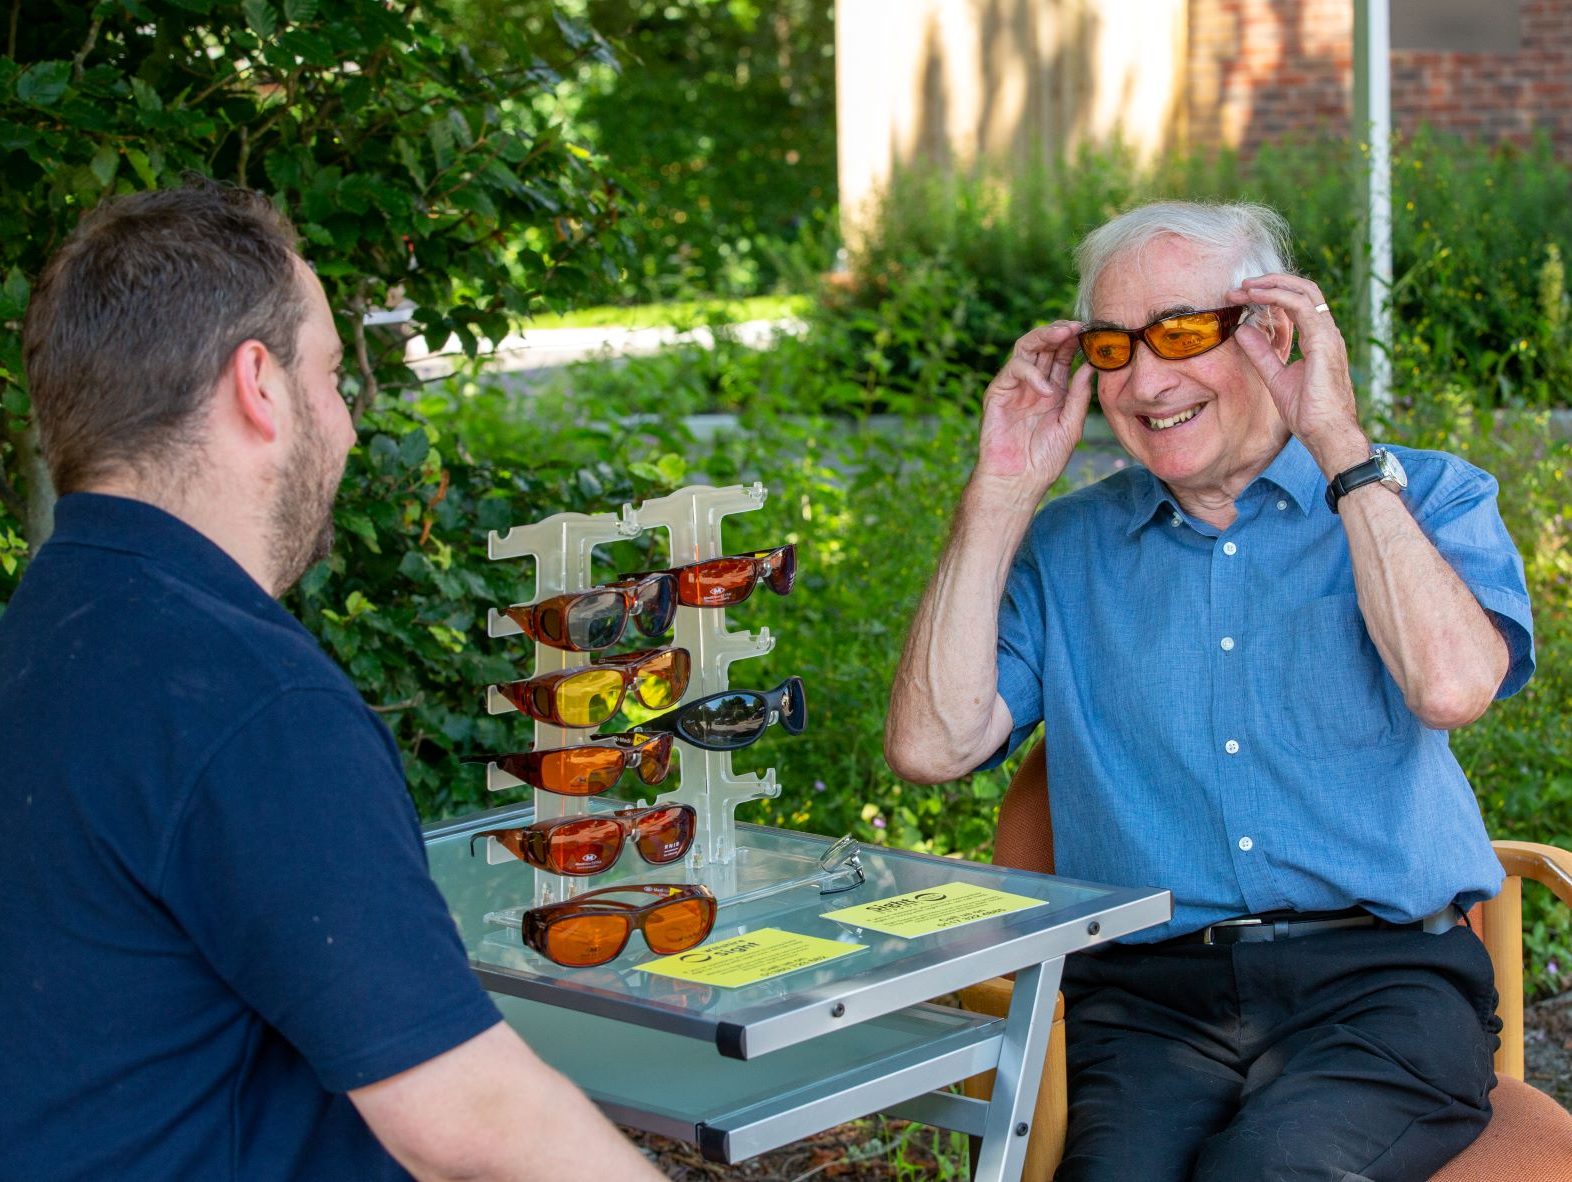 A Community Sight Loss Advisor is sitting outside with a gentleman who is trying out some eyeshields.